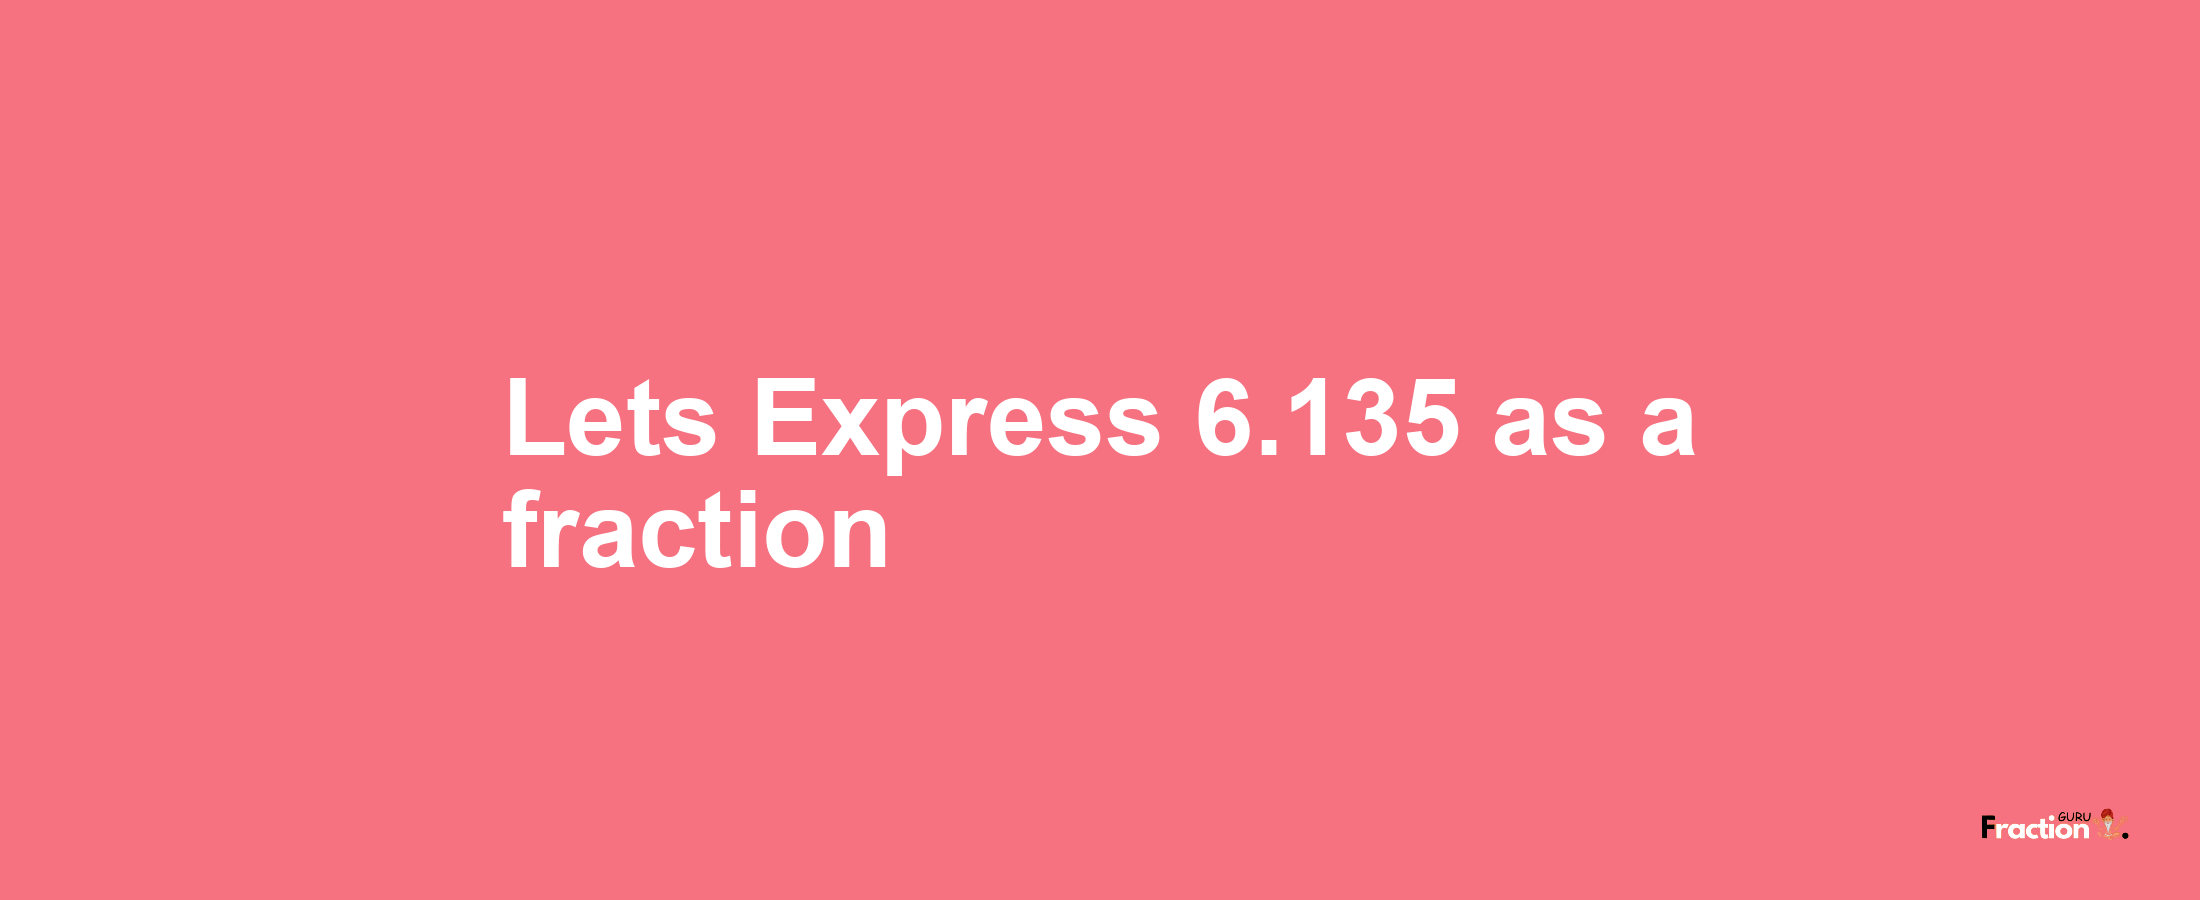 Lets Express 6.135 as afraction